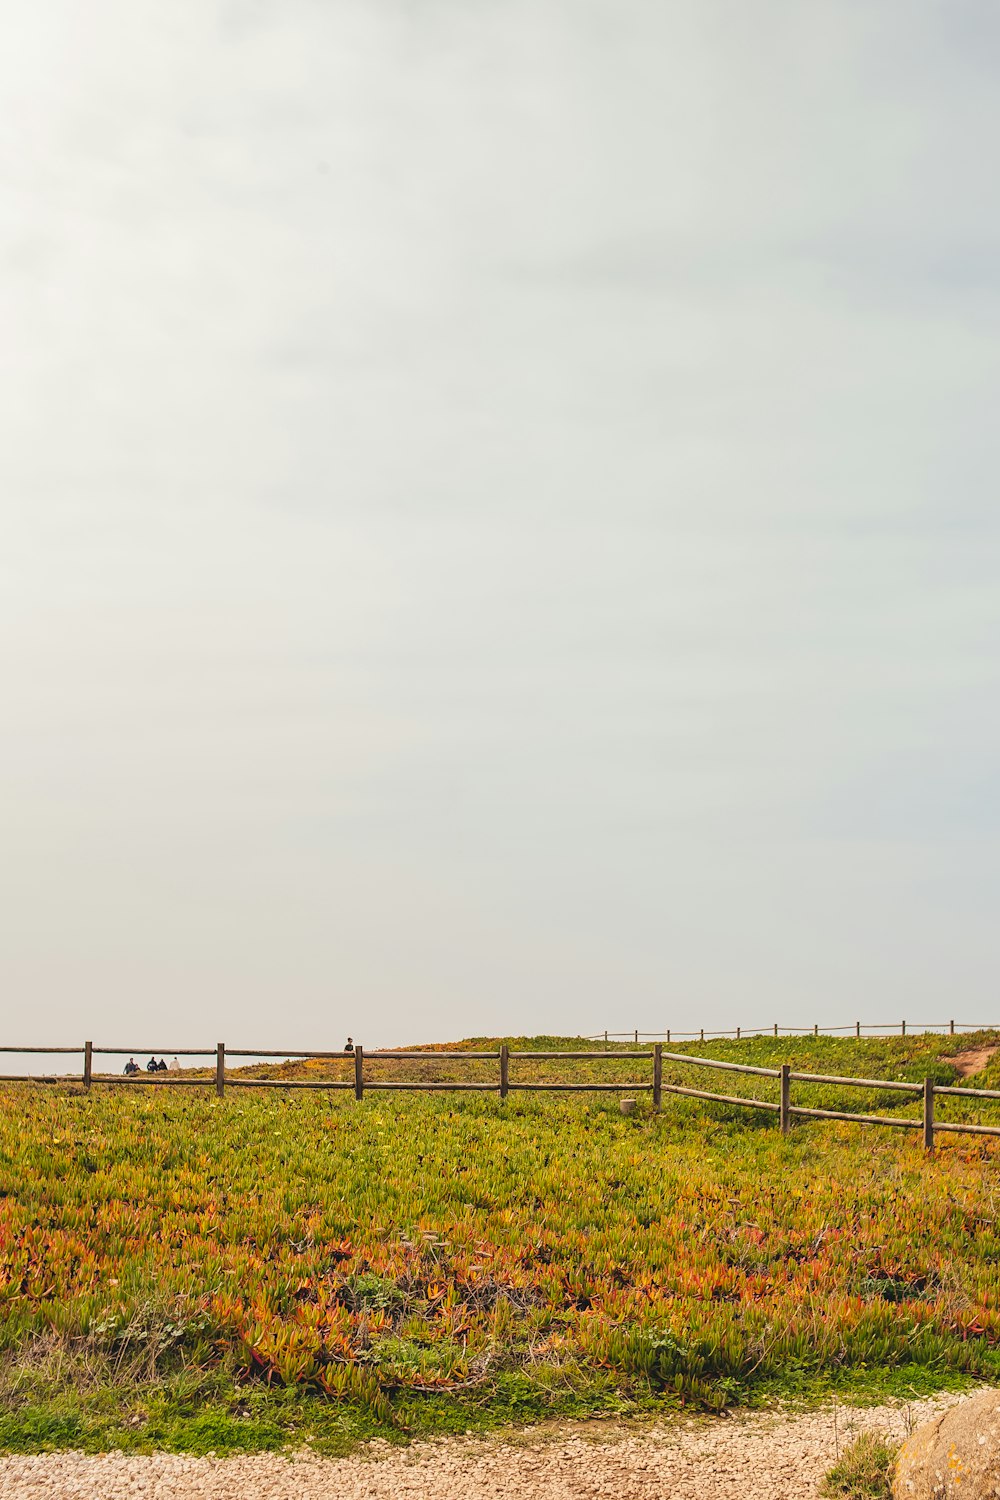 a horse standing in a field with a wooden fence